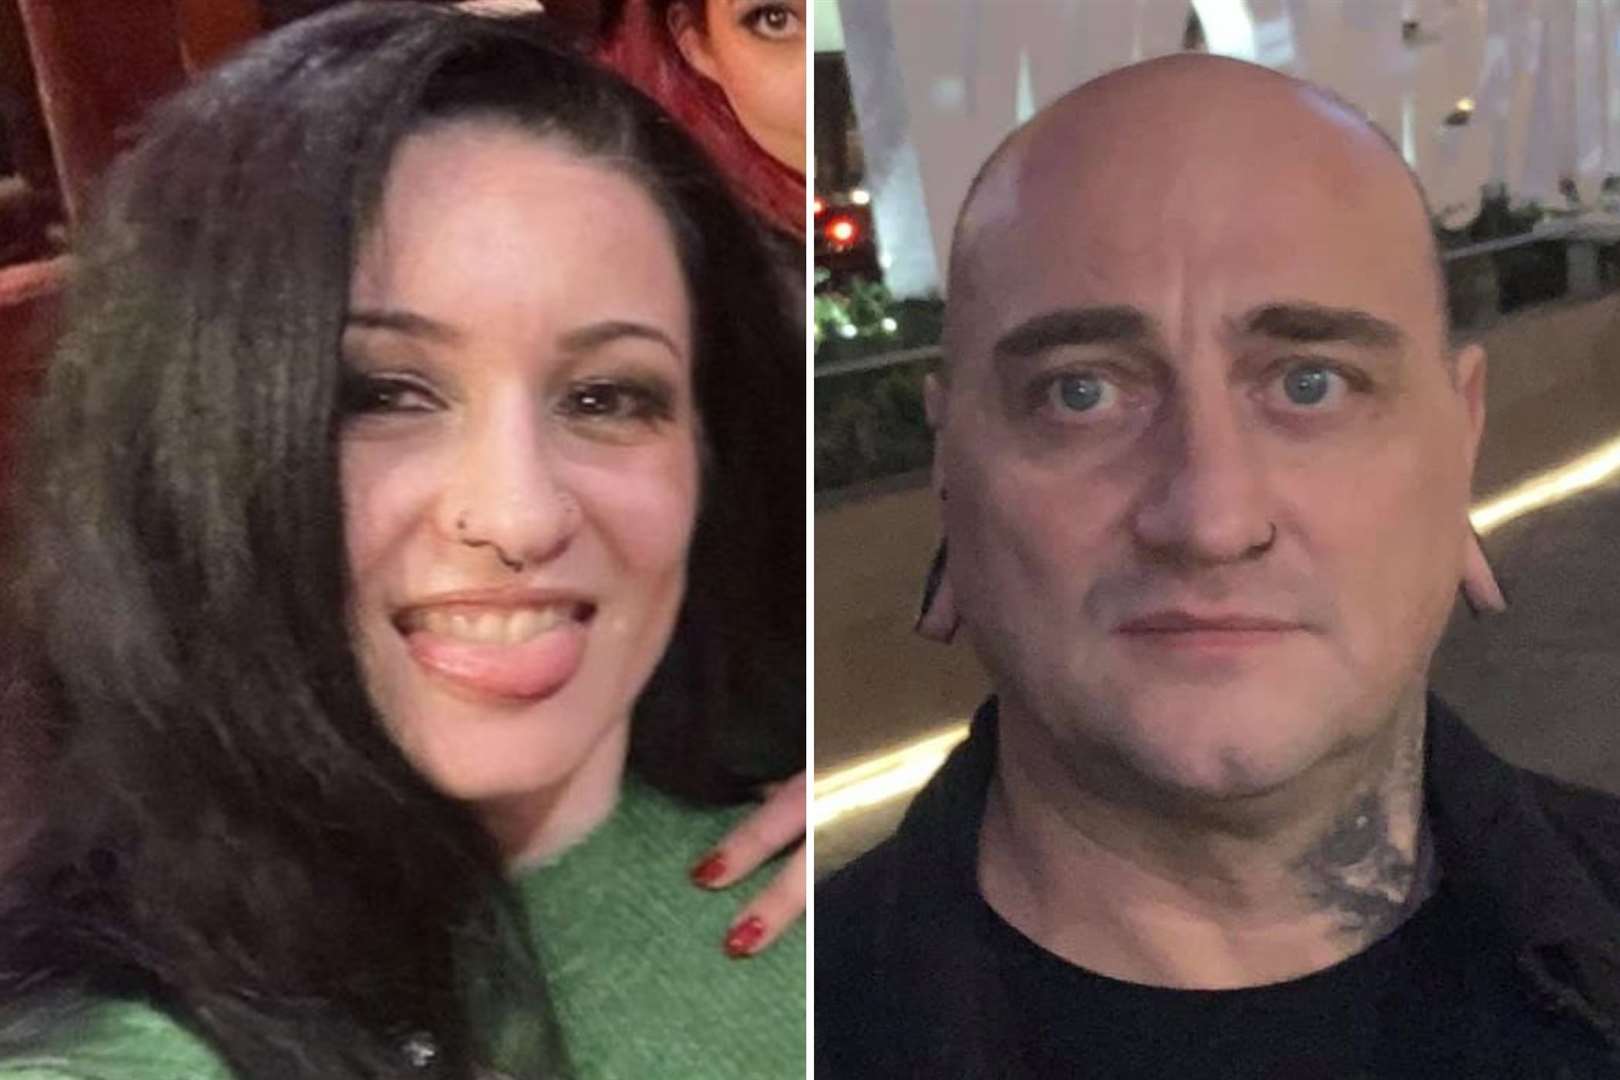 Ramona Stoia and Catalin Micu died at GothInk Studio tattoo parlour in Canterbury on Monday